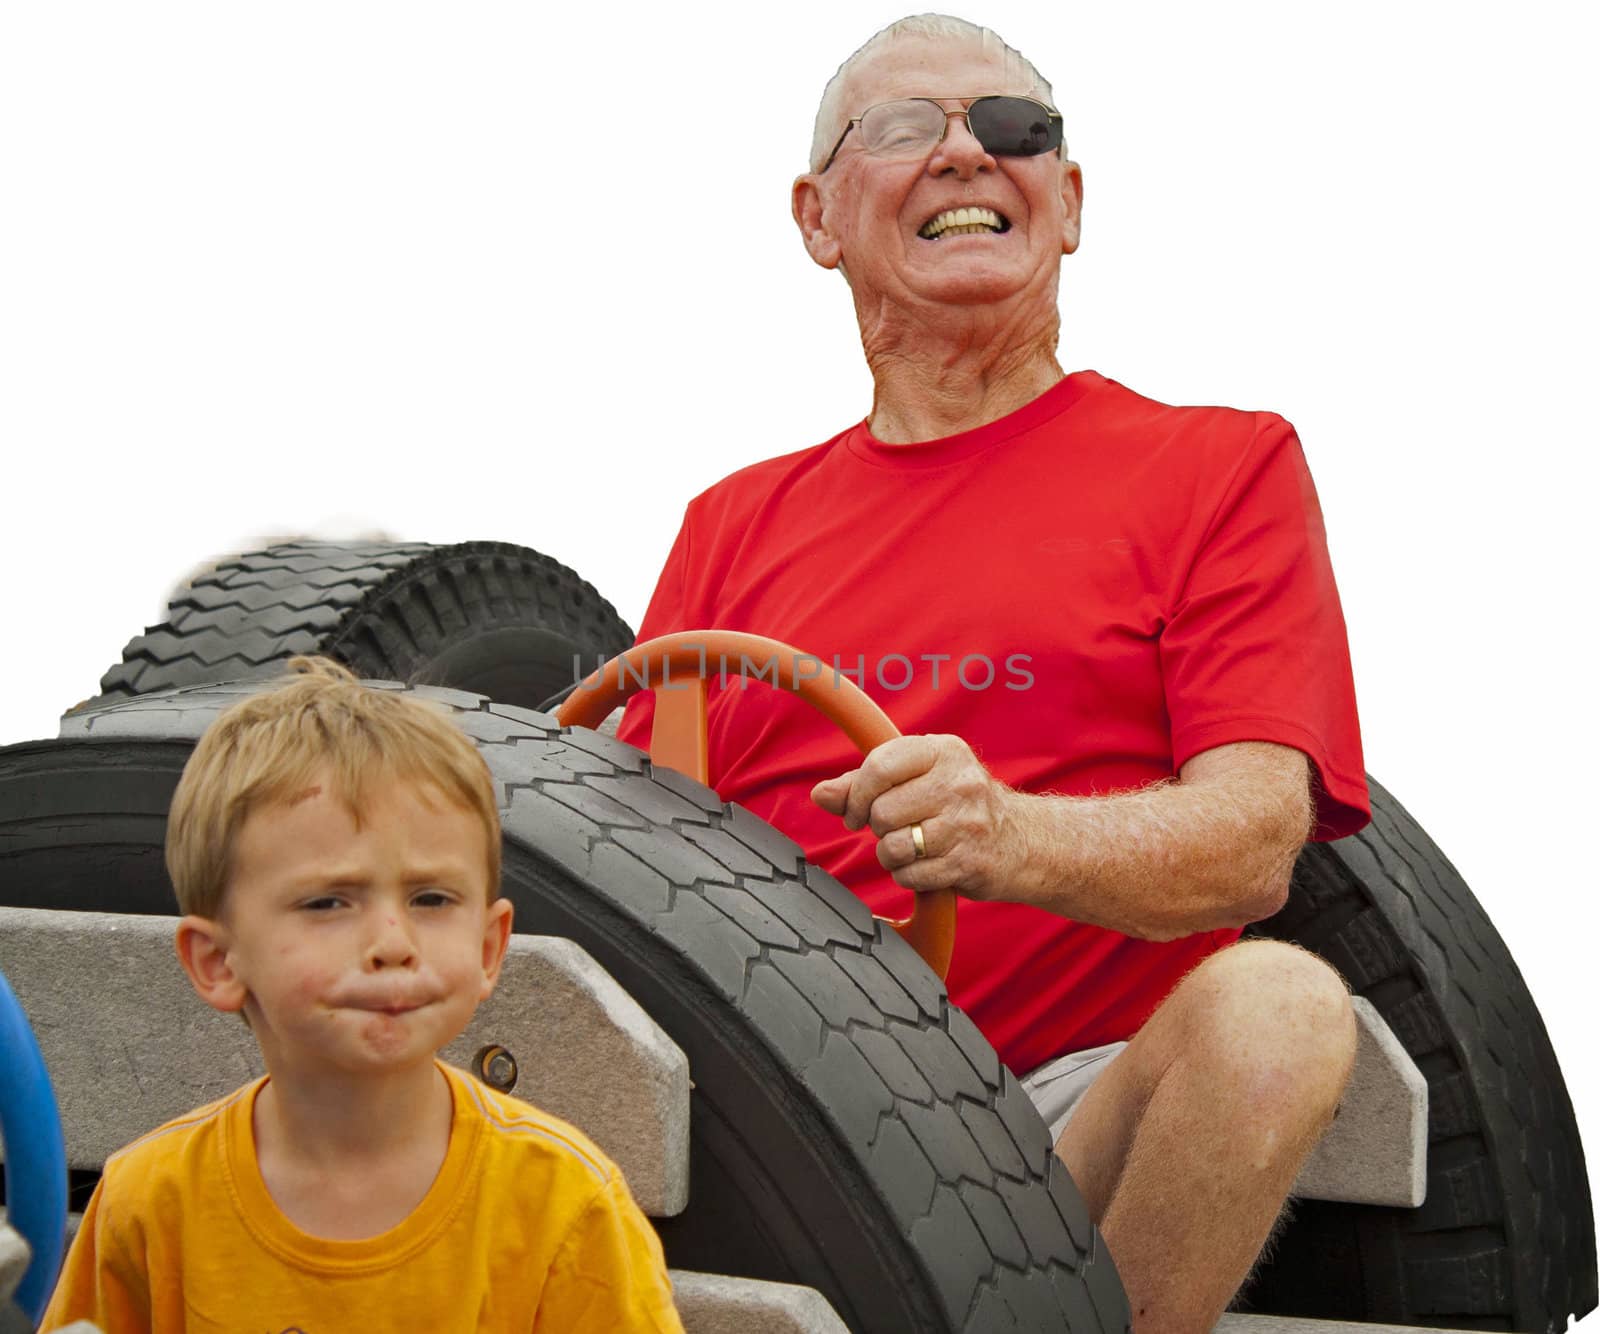 Grandson grumpy as grandfather grins and guides car by edhunt